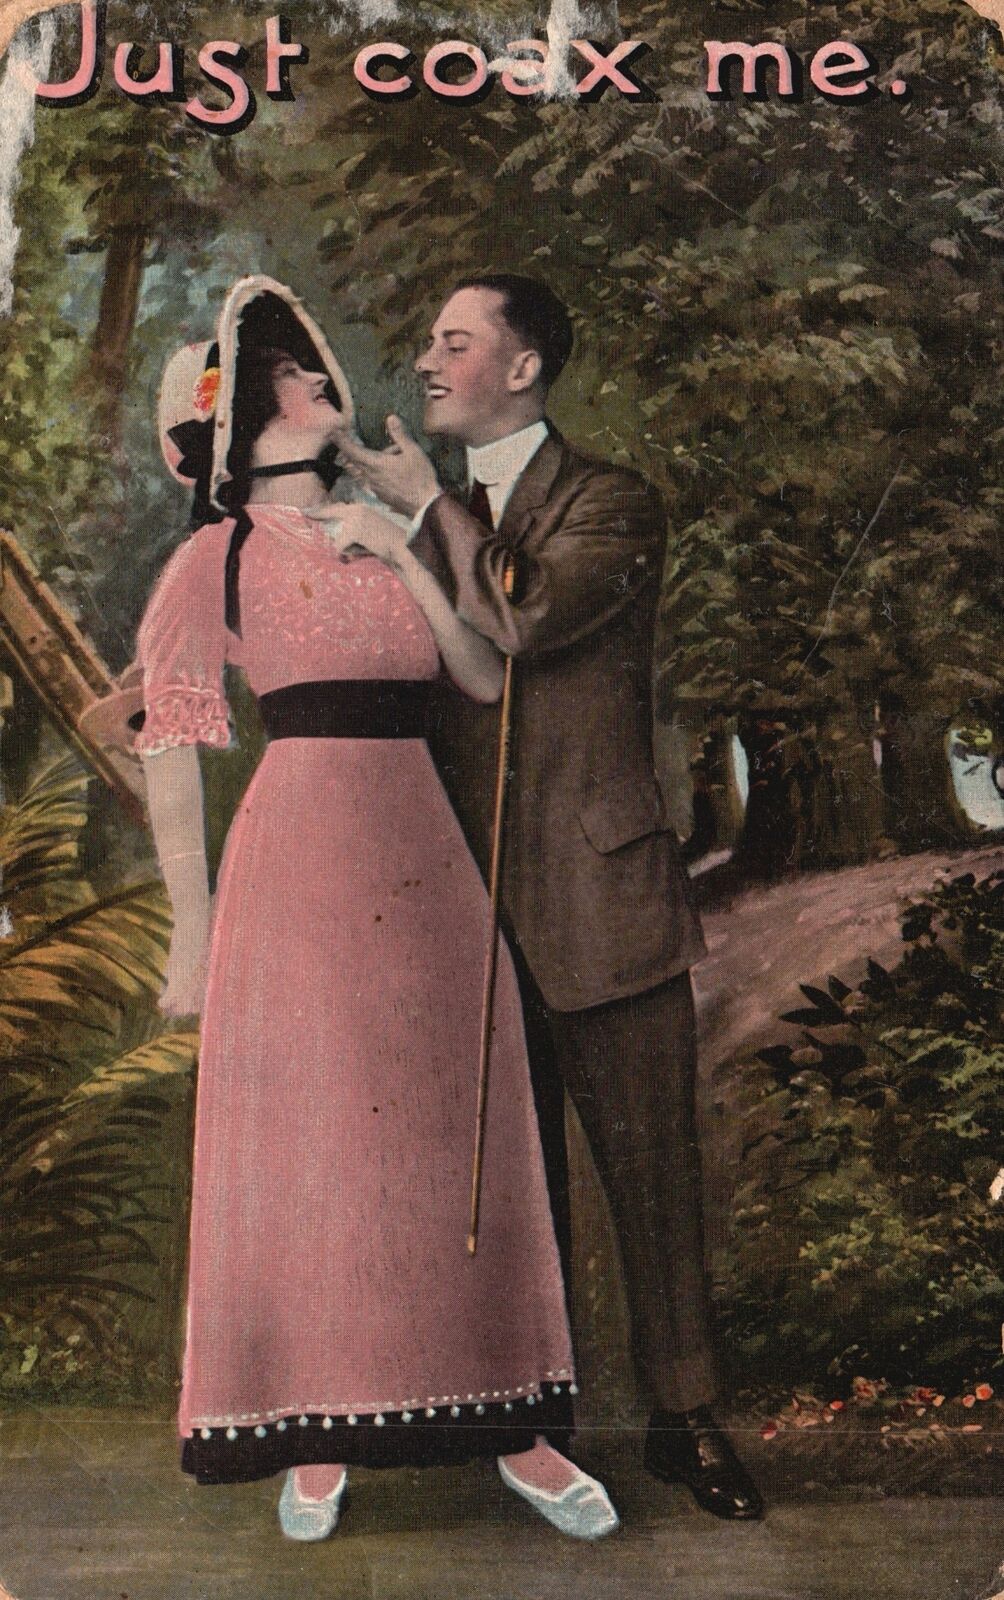 Vintage Postcard 1914 Lovers Couple Dating Happy Moments Just Coax Me